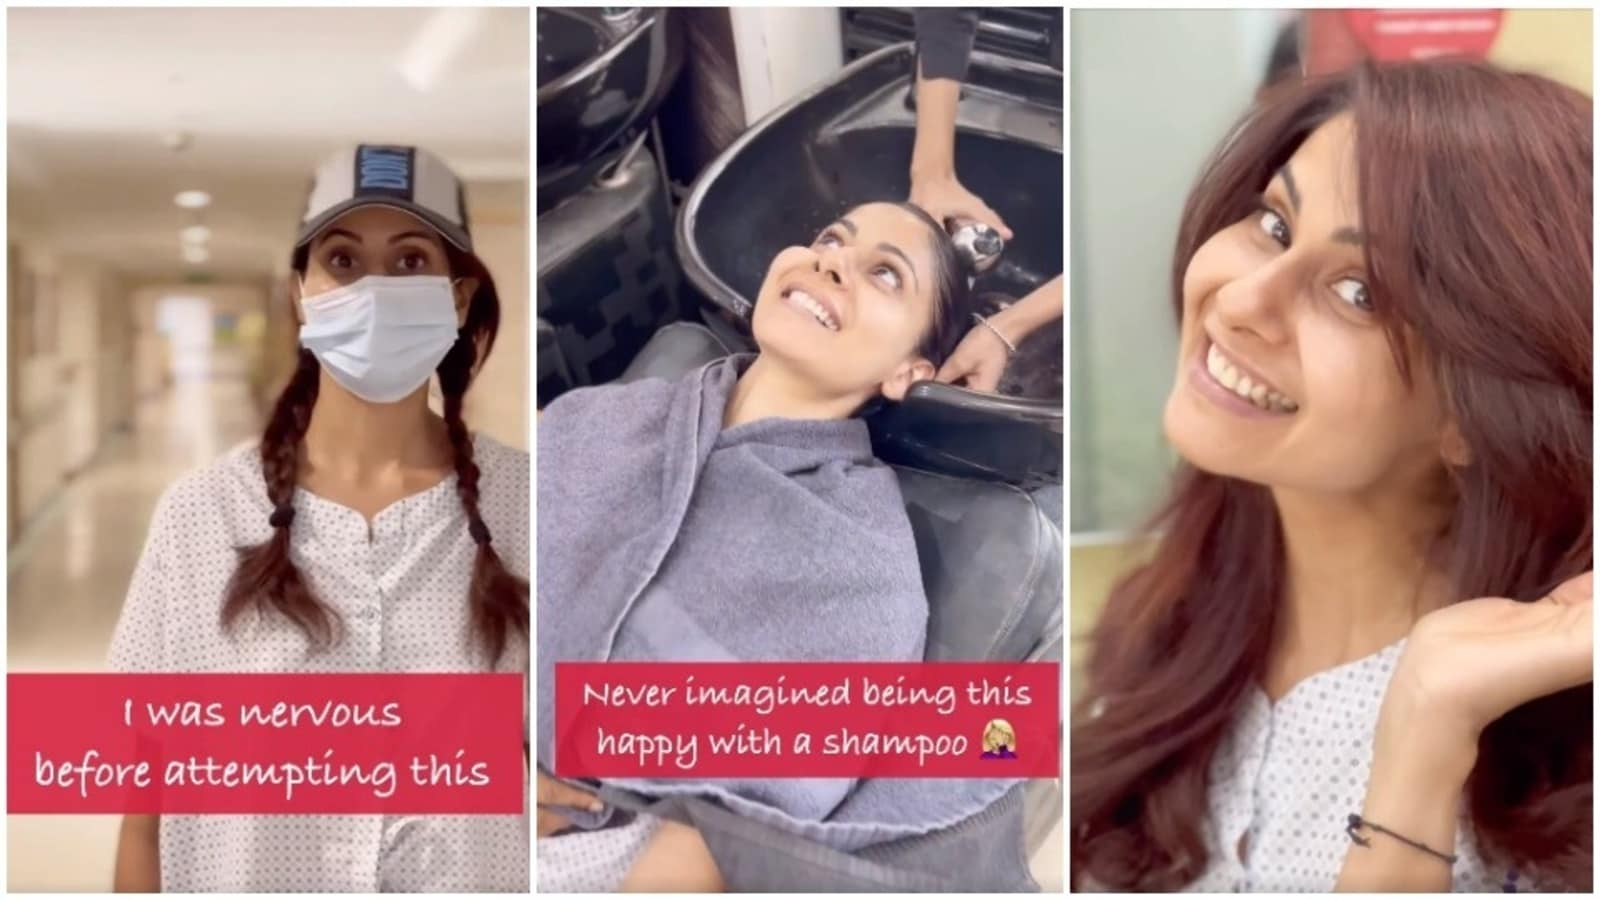 Chhavi Mittal treats herself to a salon session at hospital after breast cancer surgery. Watch new Reel